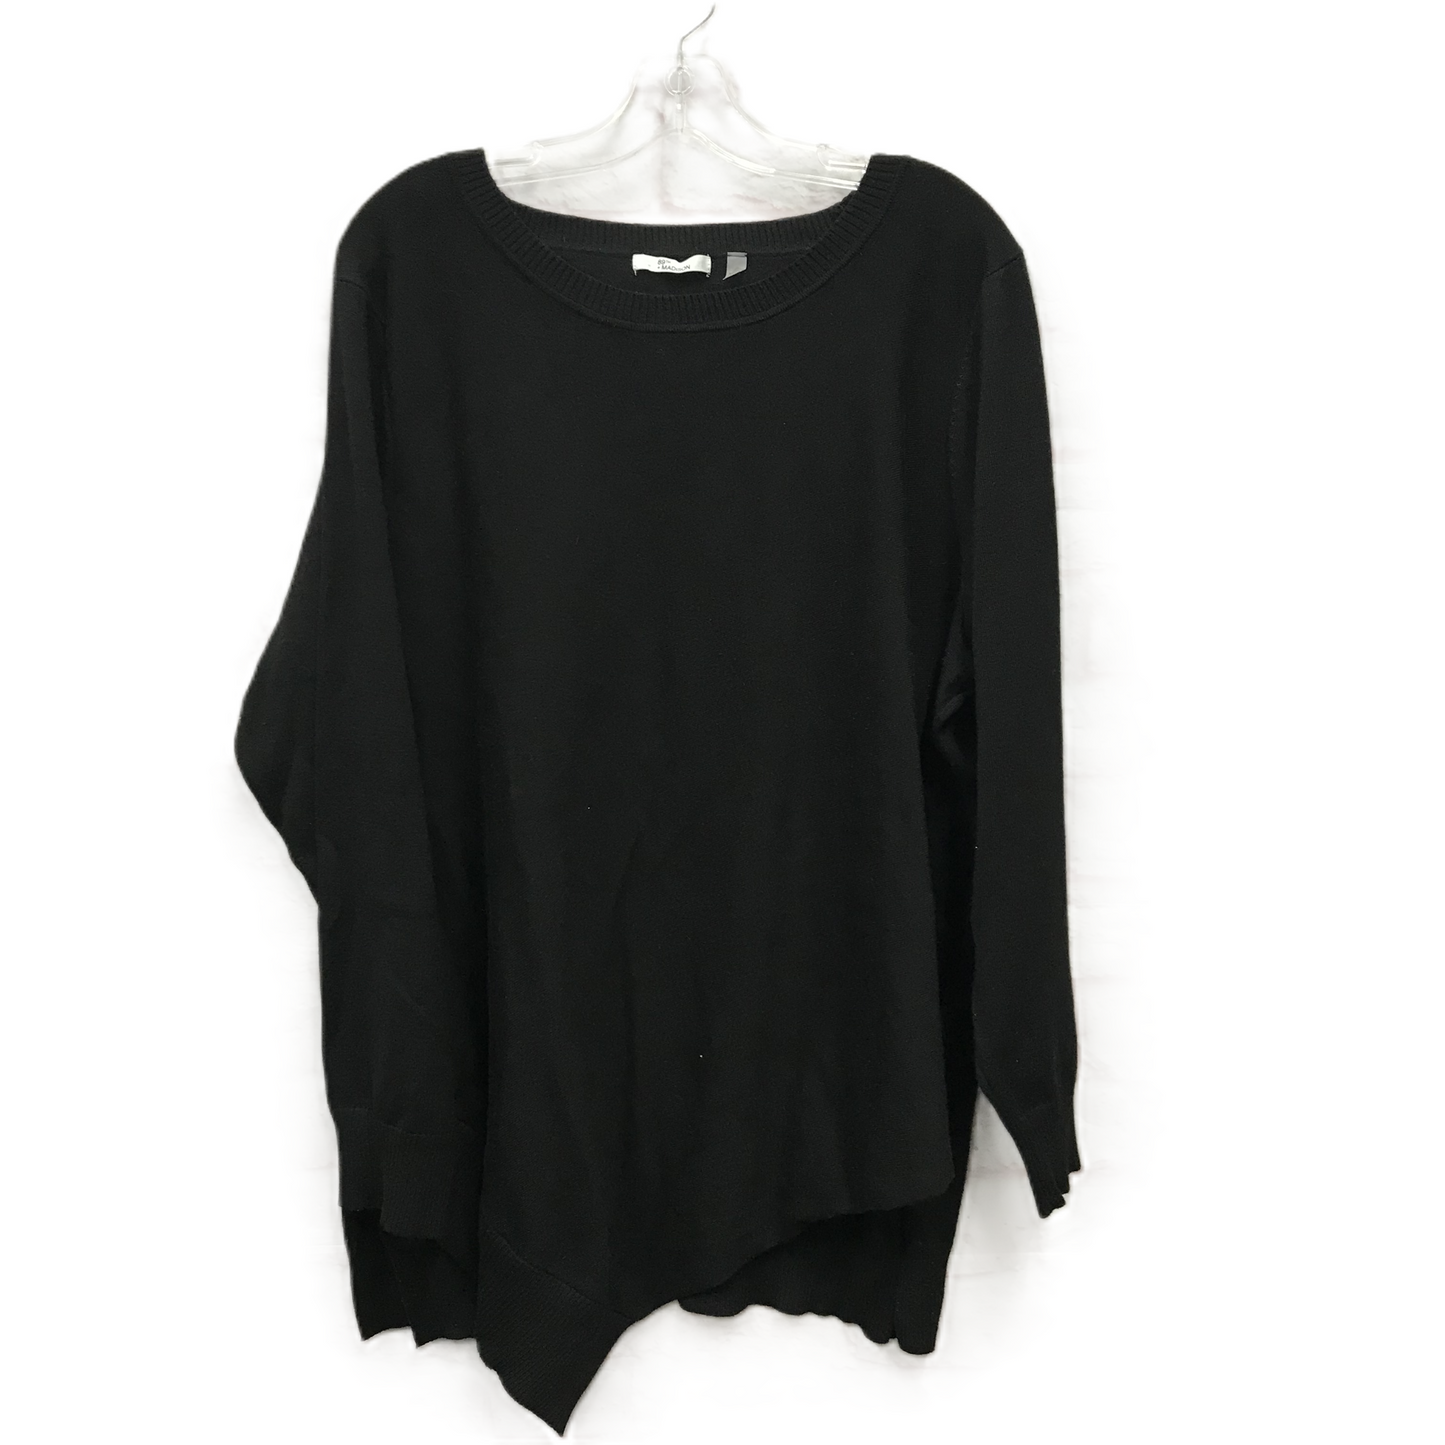 Black Sweater By 89th And Madison, Size: 2x